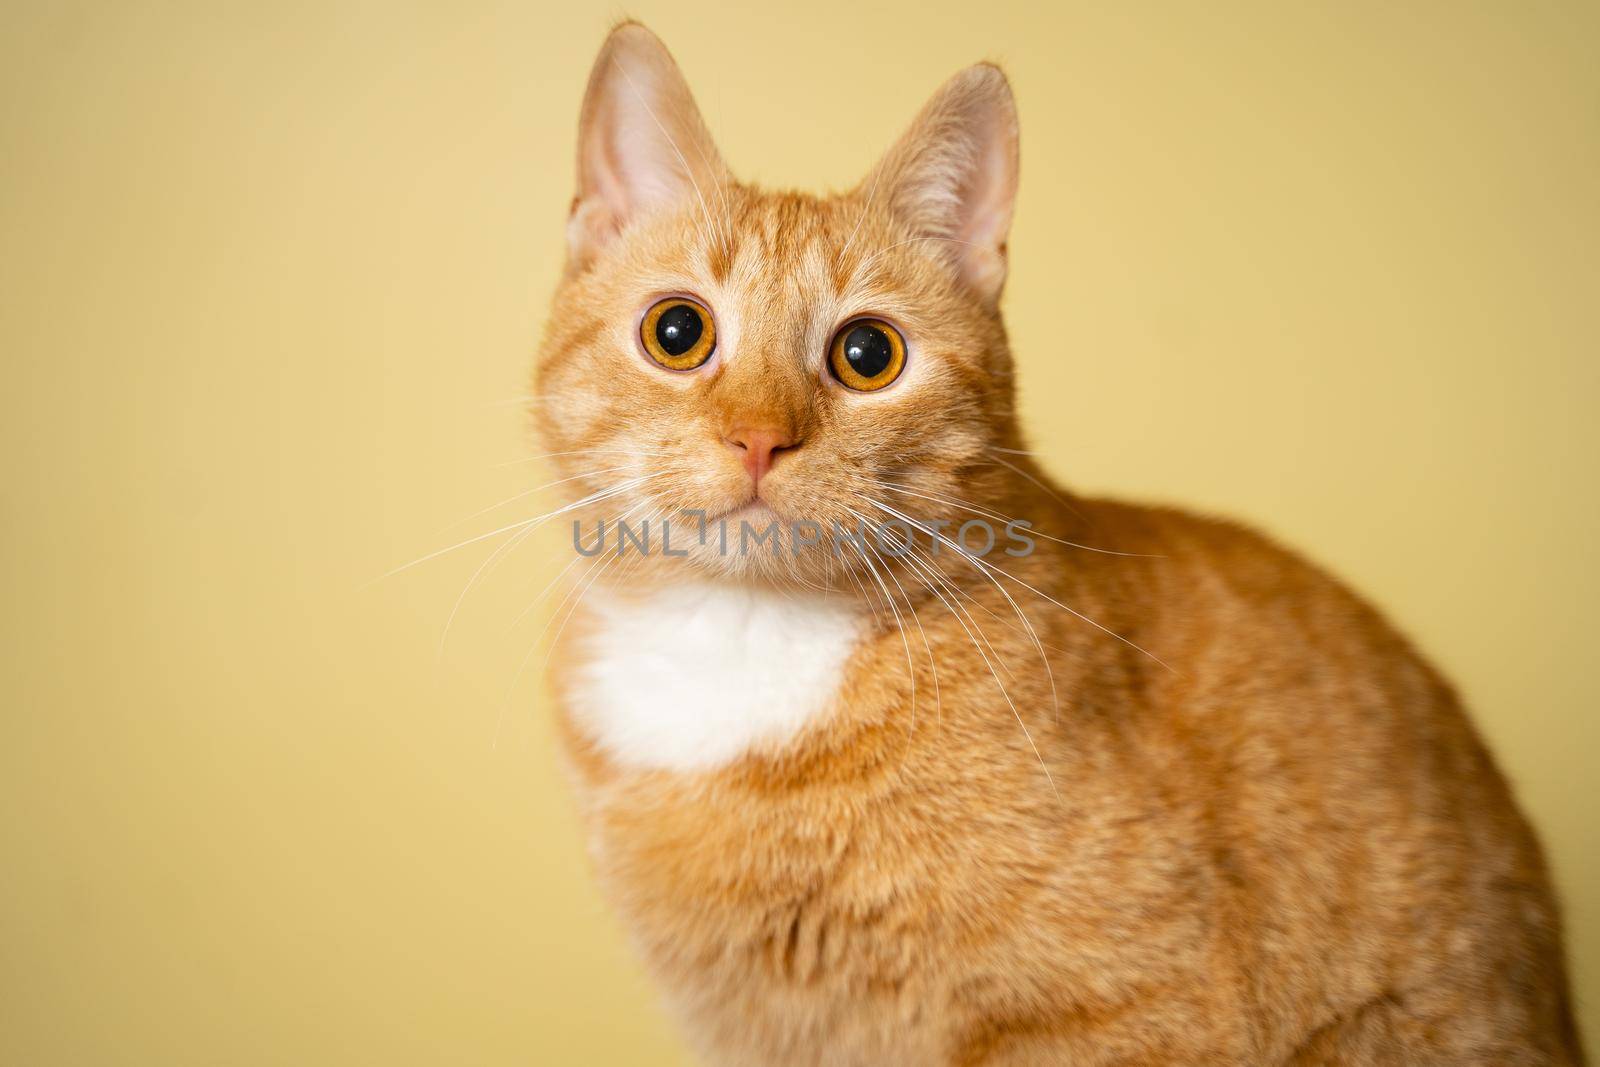 Cute Ginger tabby cat on yellow background. Red fluffy friend. Domestic cute pet. Animal and pet concept. An adult red cat sits posing on a stool in the studio against the background of a yellow wall by Tomashevska